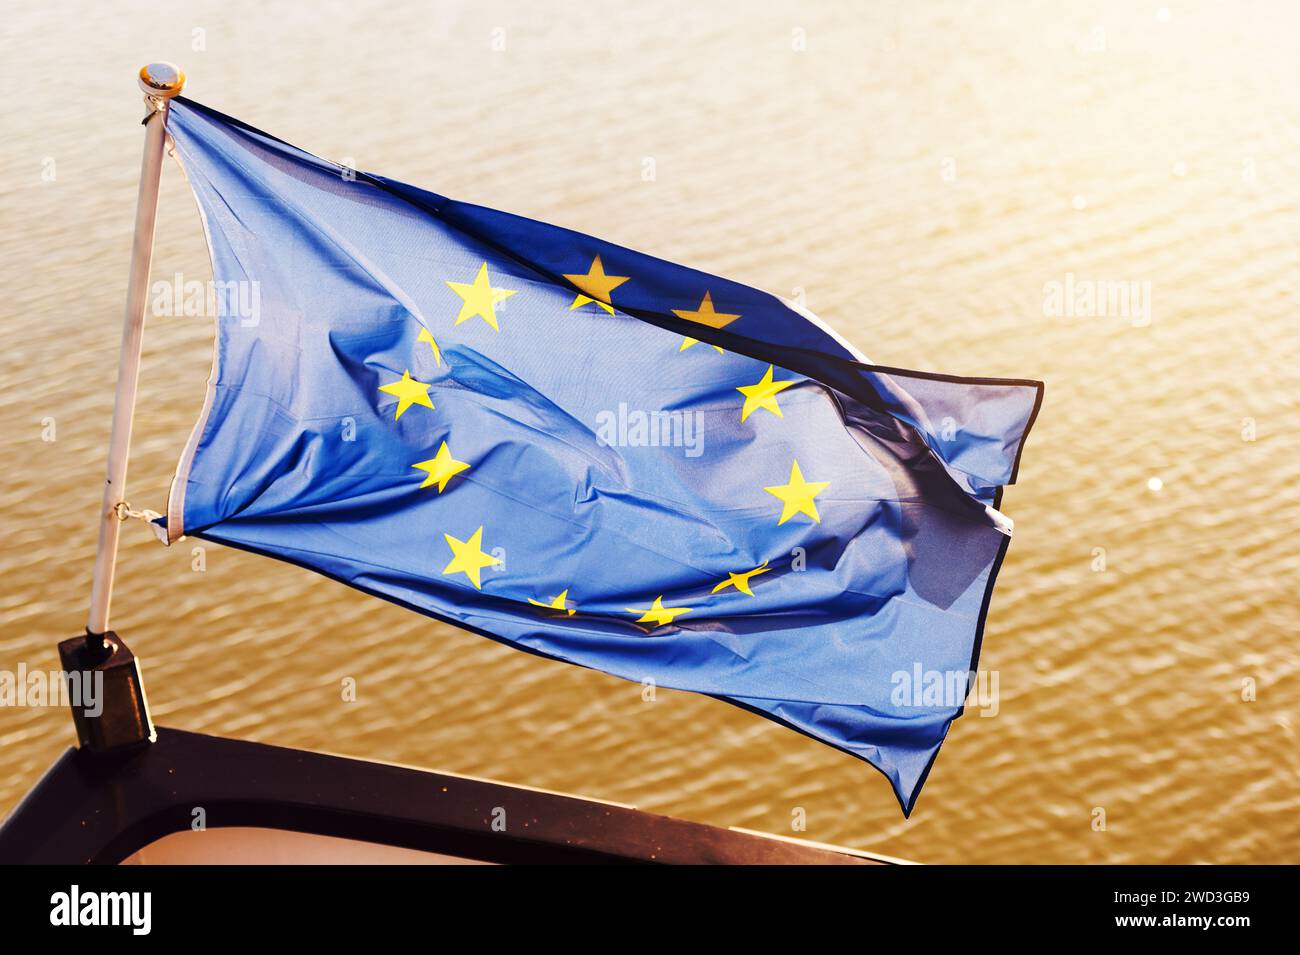 EU flag in front of a boat Stock Photo